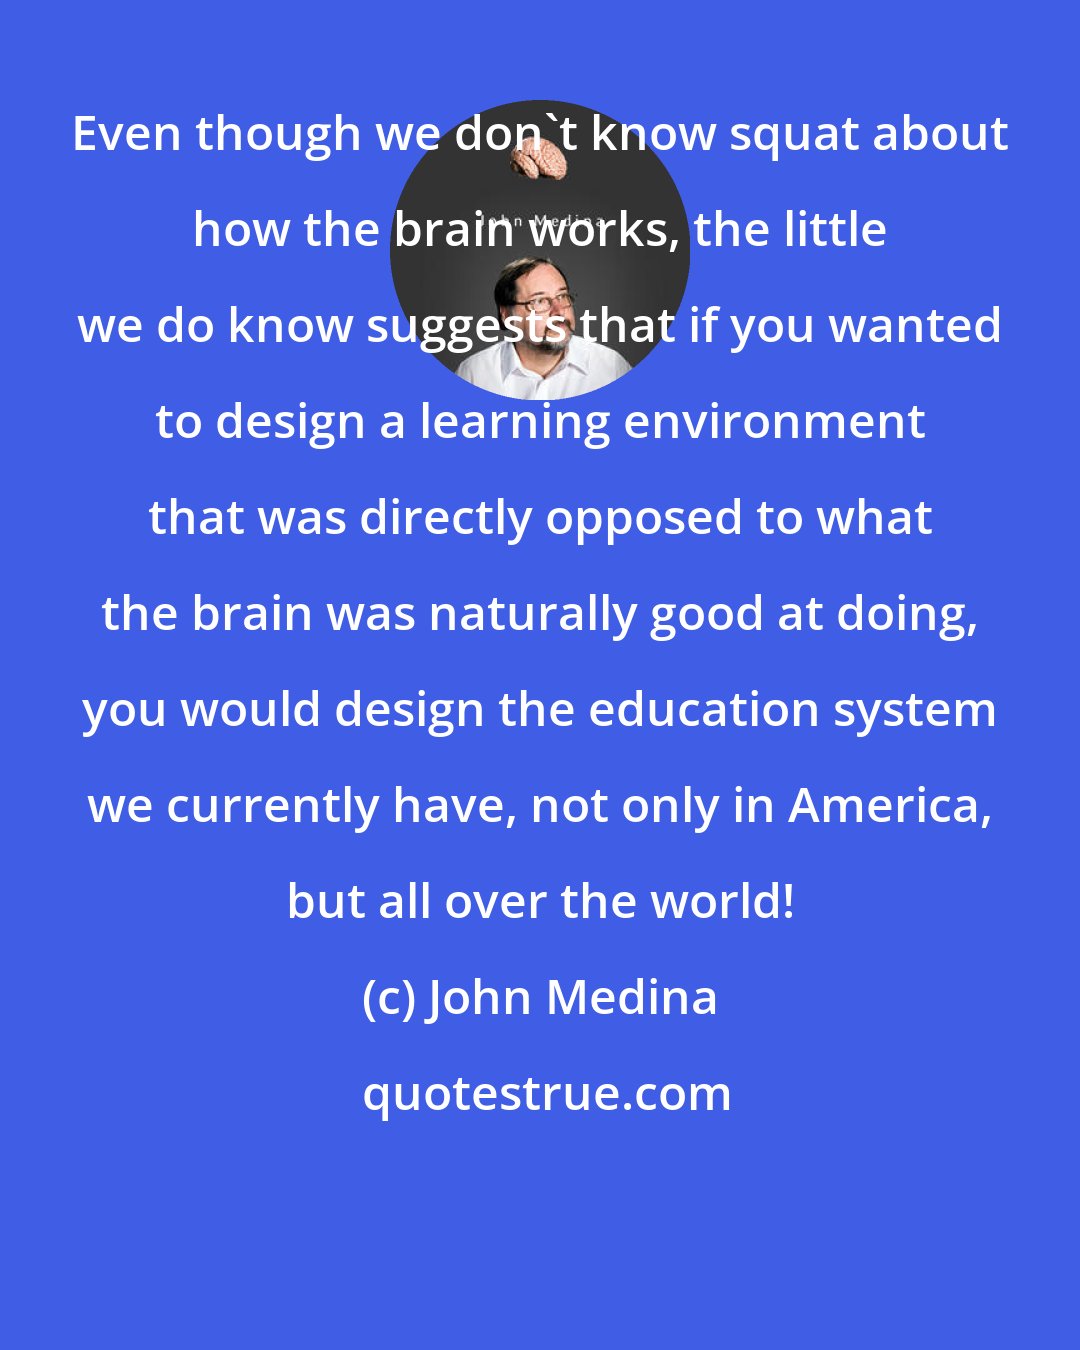 John Medina: Even though we don't know squat about how the brain works, the little we do know suggests that if you wanted to design a learning environment that was directly opposed to what the brain was naturally good at doing, you would design the education system we currently have, not only in America, but all over the world!